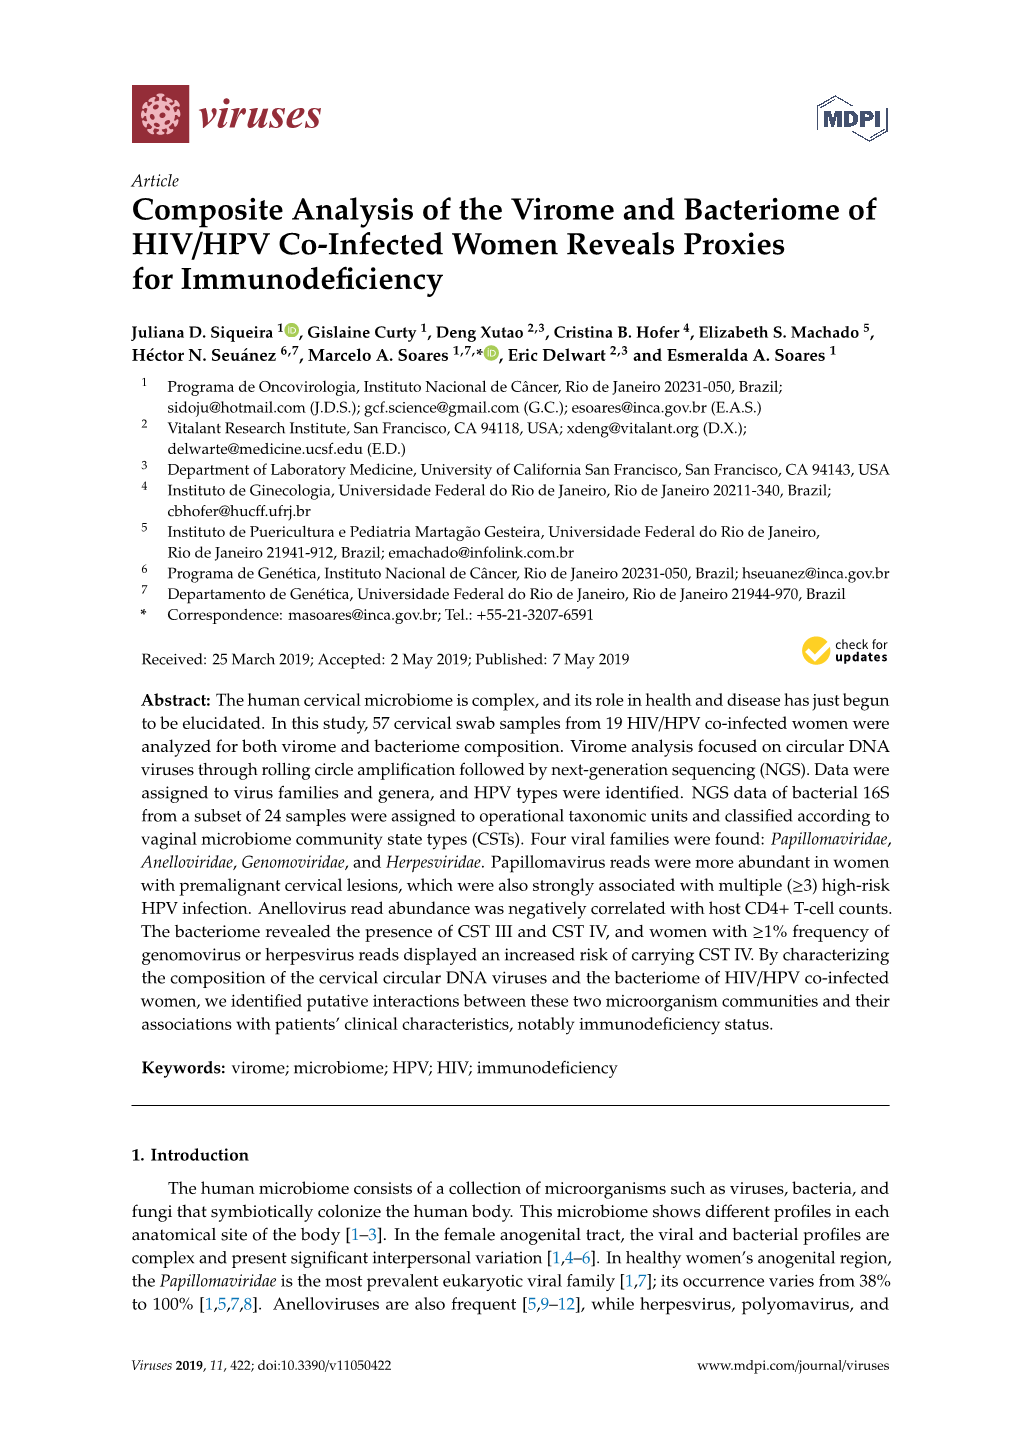 Composite Analysis of the Virome and Bacteriome of HIV/HPV Co-Infected Women Reveals Proxies for Immunodeﬁciency